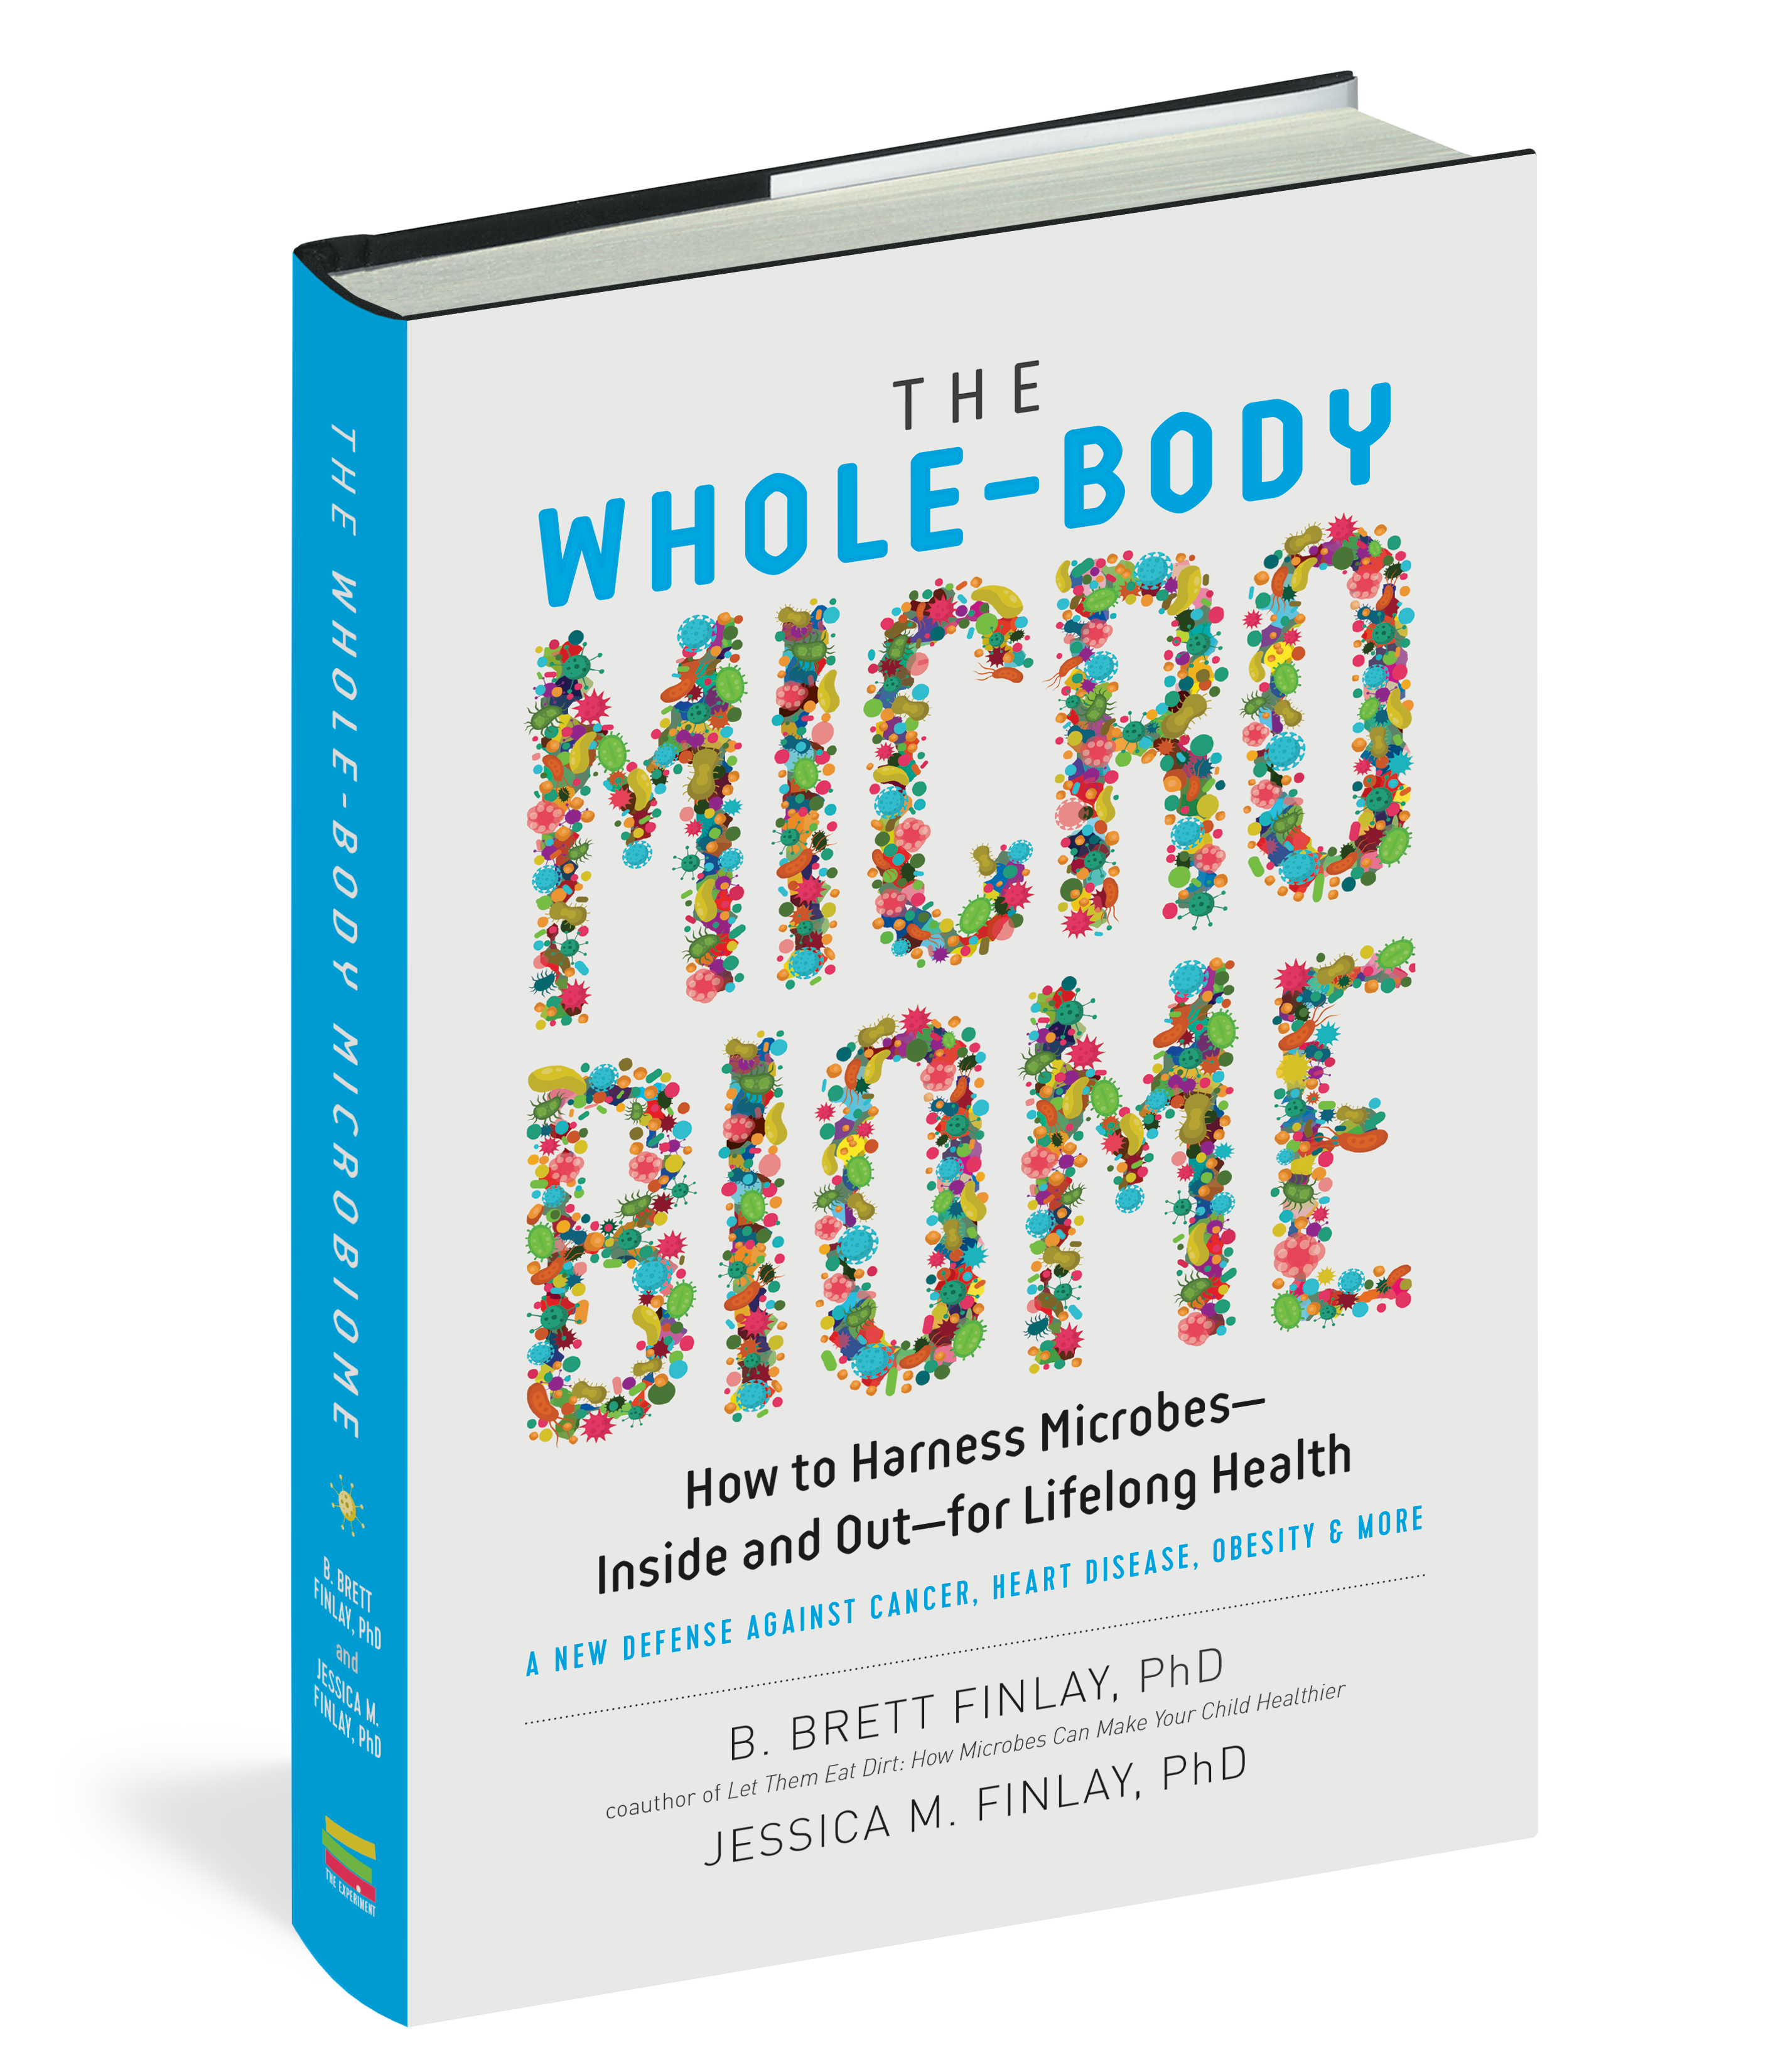 Dr. Brett Finlay co-authors new book on aging, “The Whole-Body Microbiome”